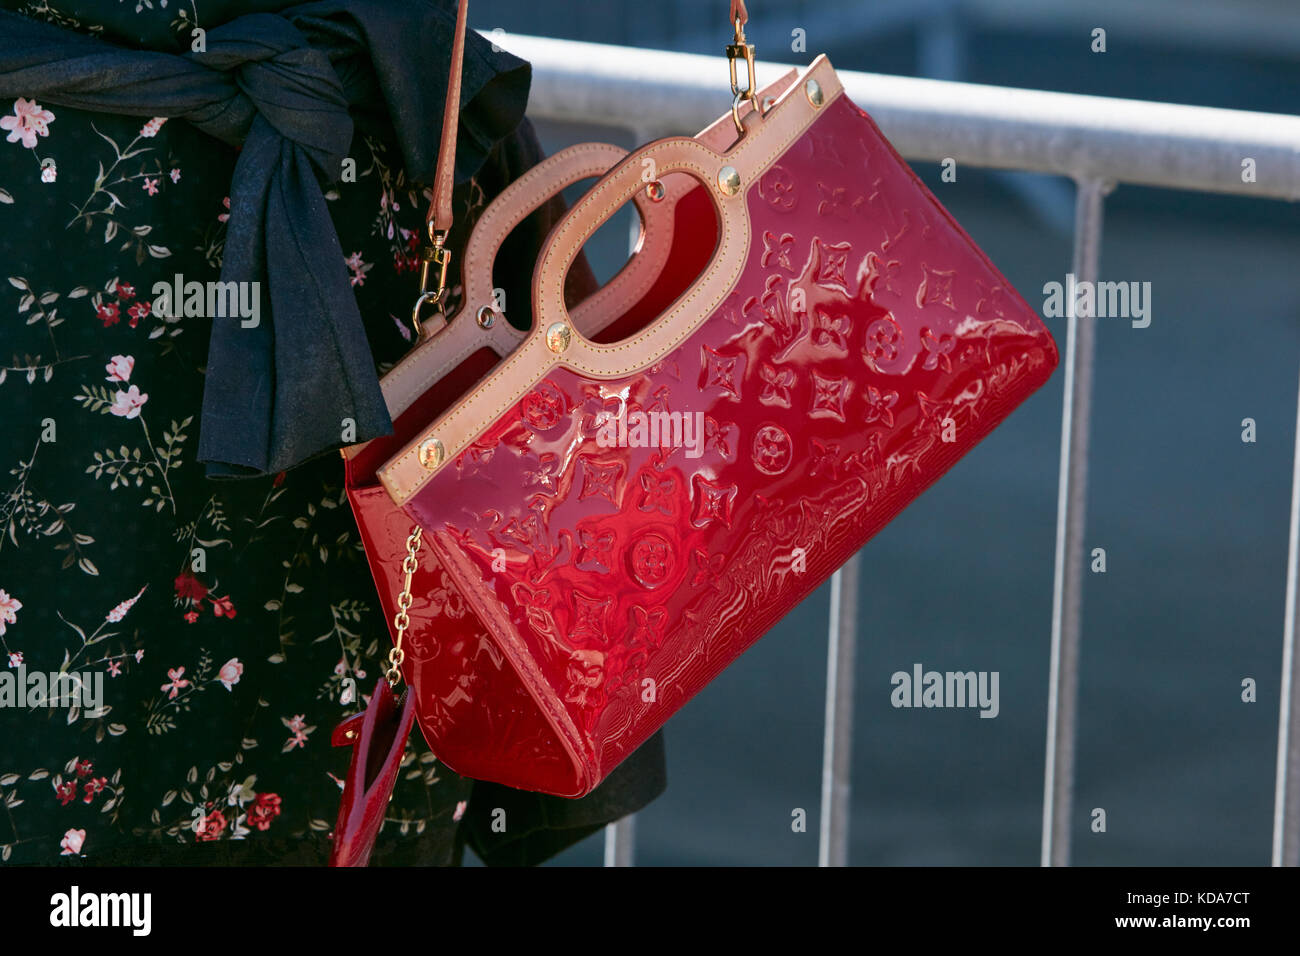 MILAN - SEPTEMBER 20: Woman with red shiny Louis Vuitton bag and